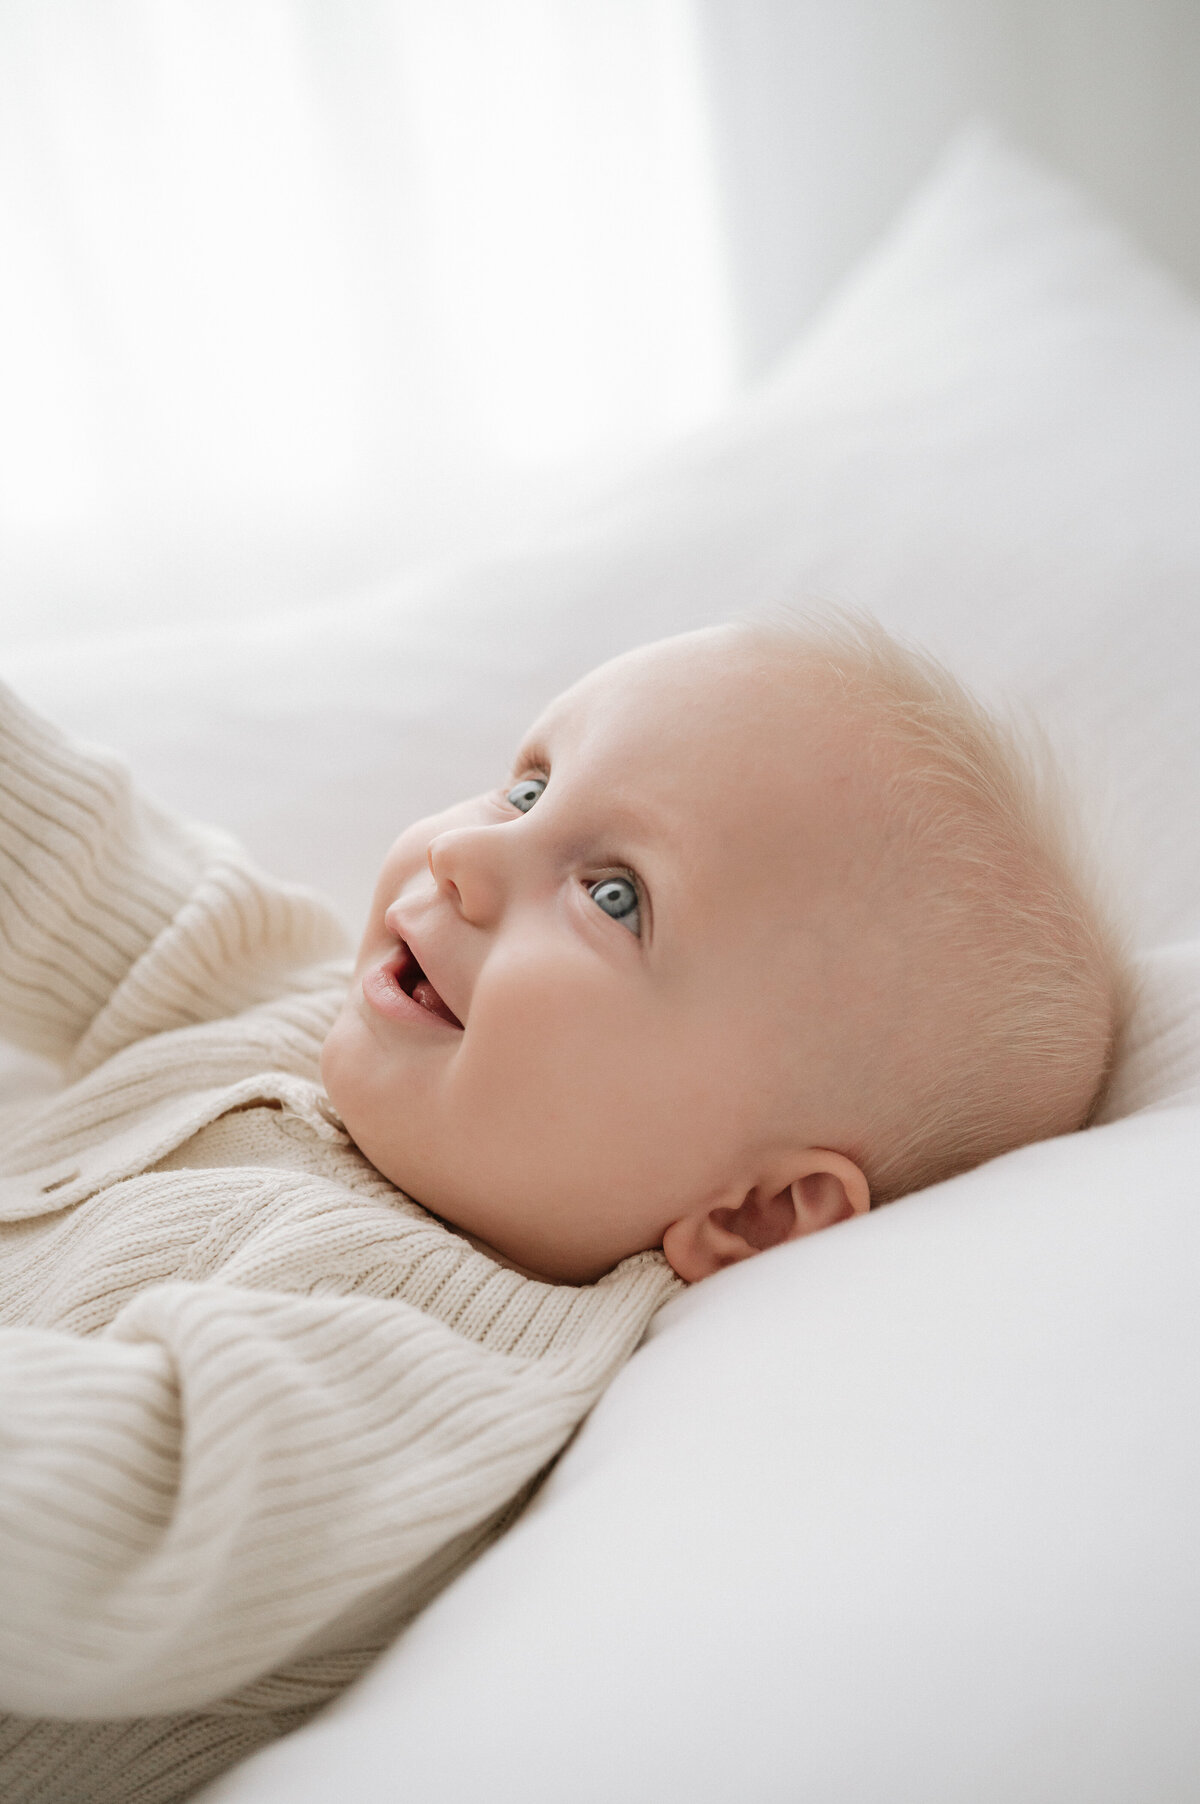 Baby lies on a white cushion smiling up